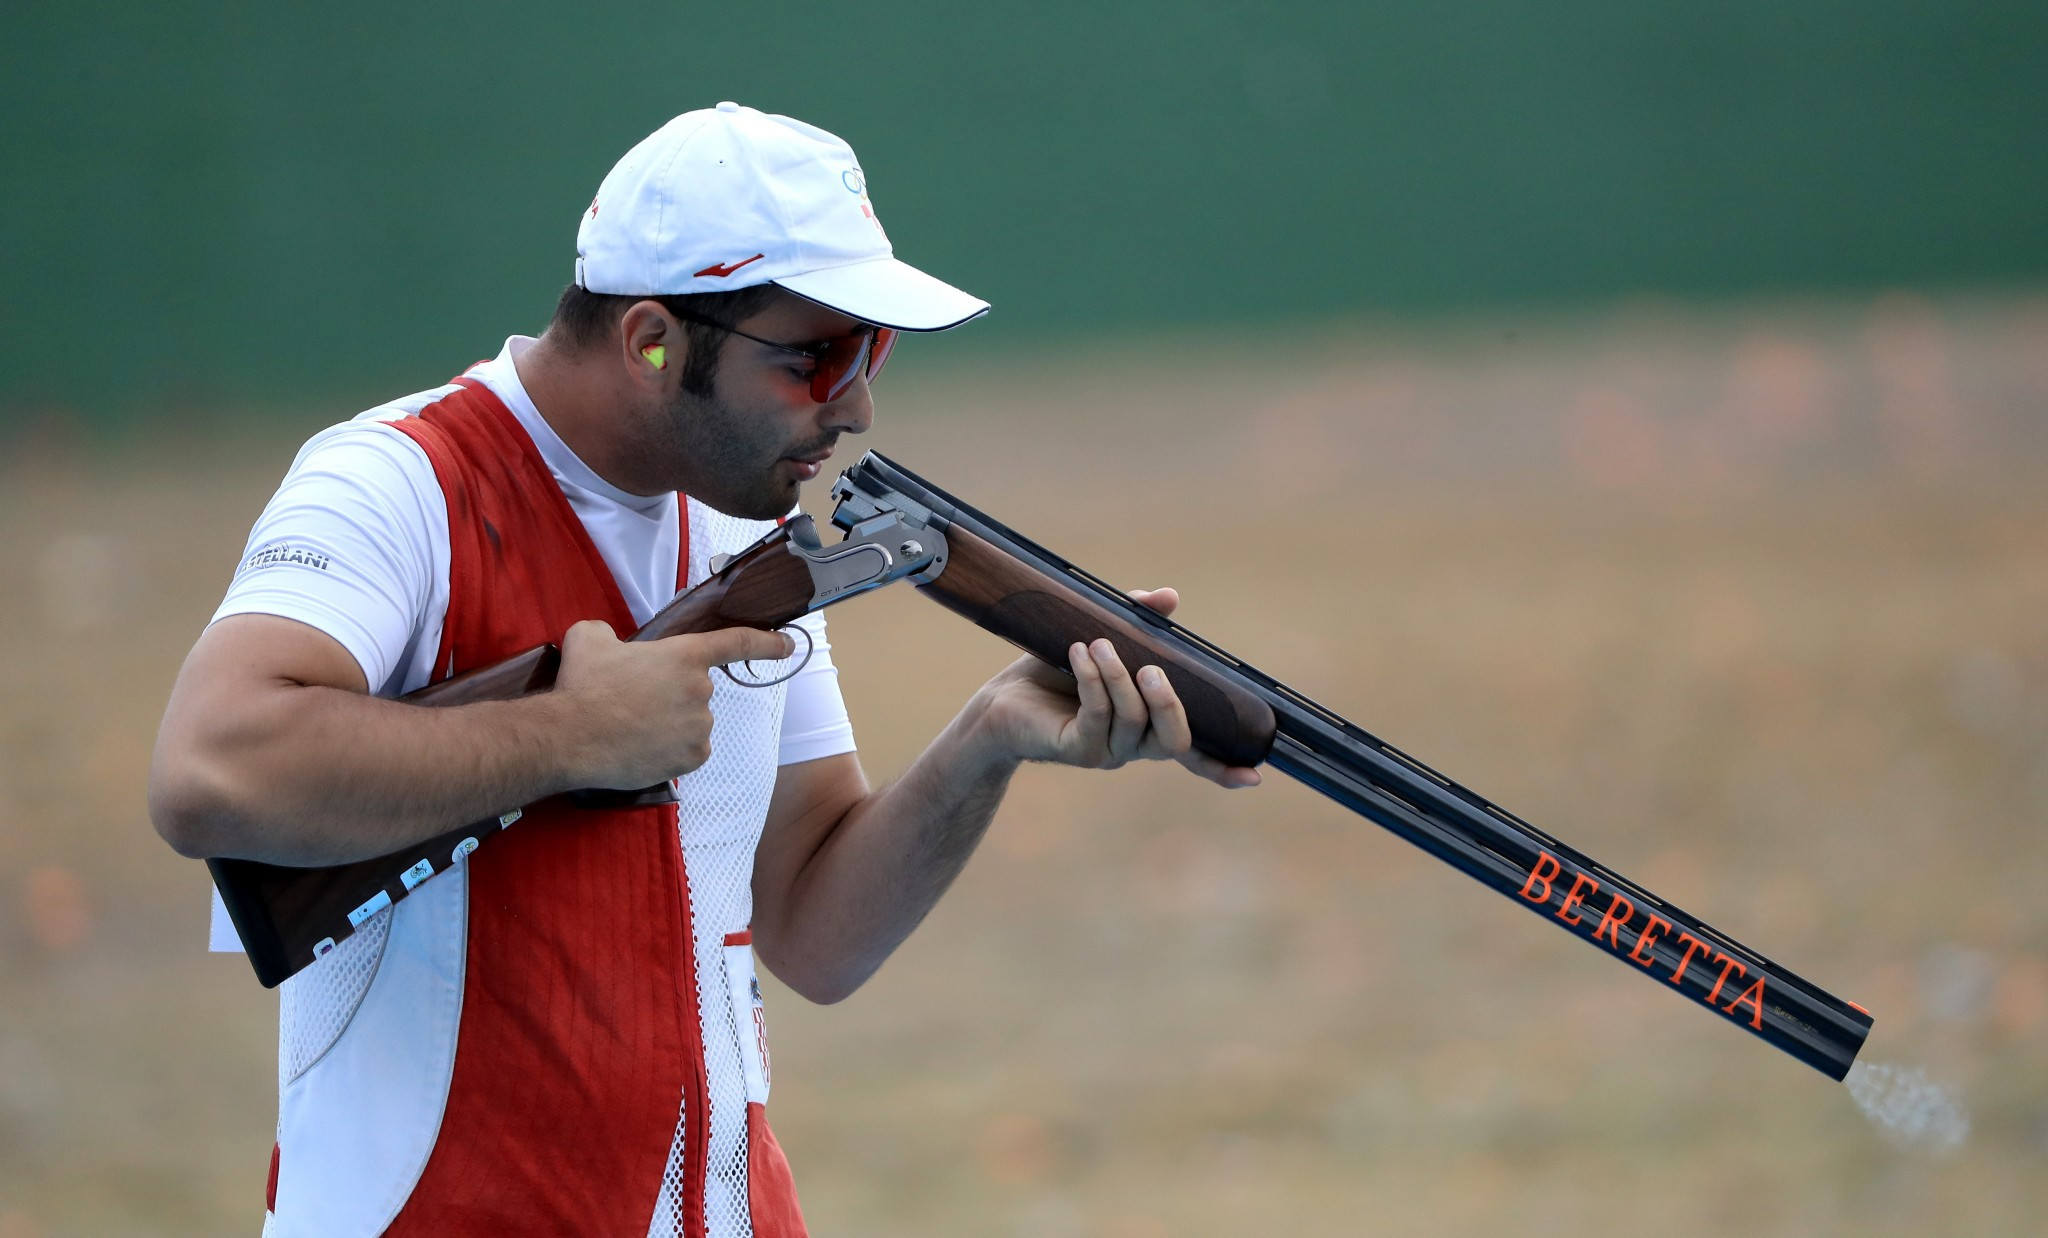 Josip Glasnovic is one of the two shotgun representatives ©Getty Images